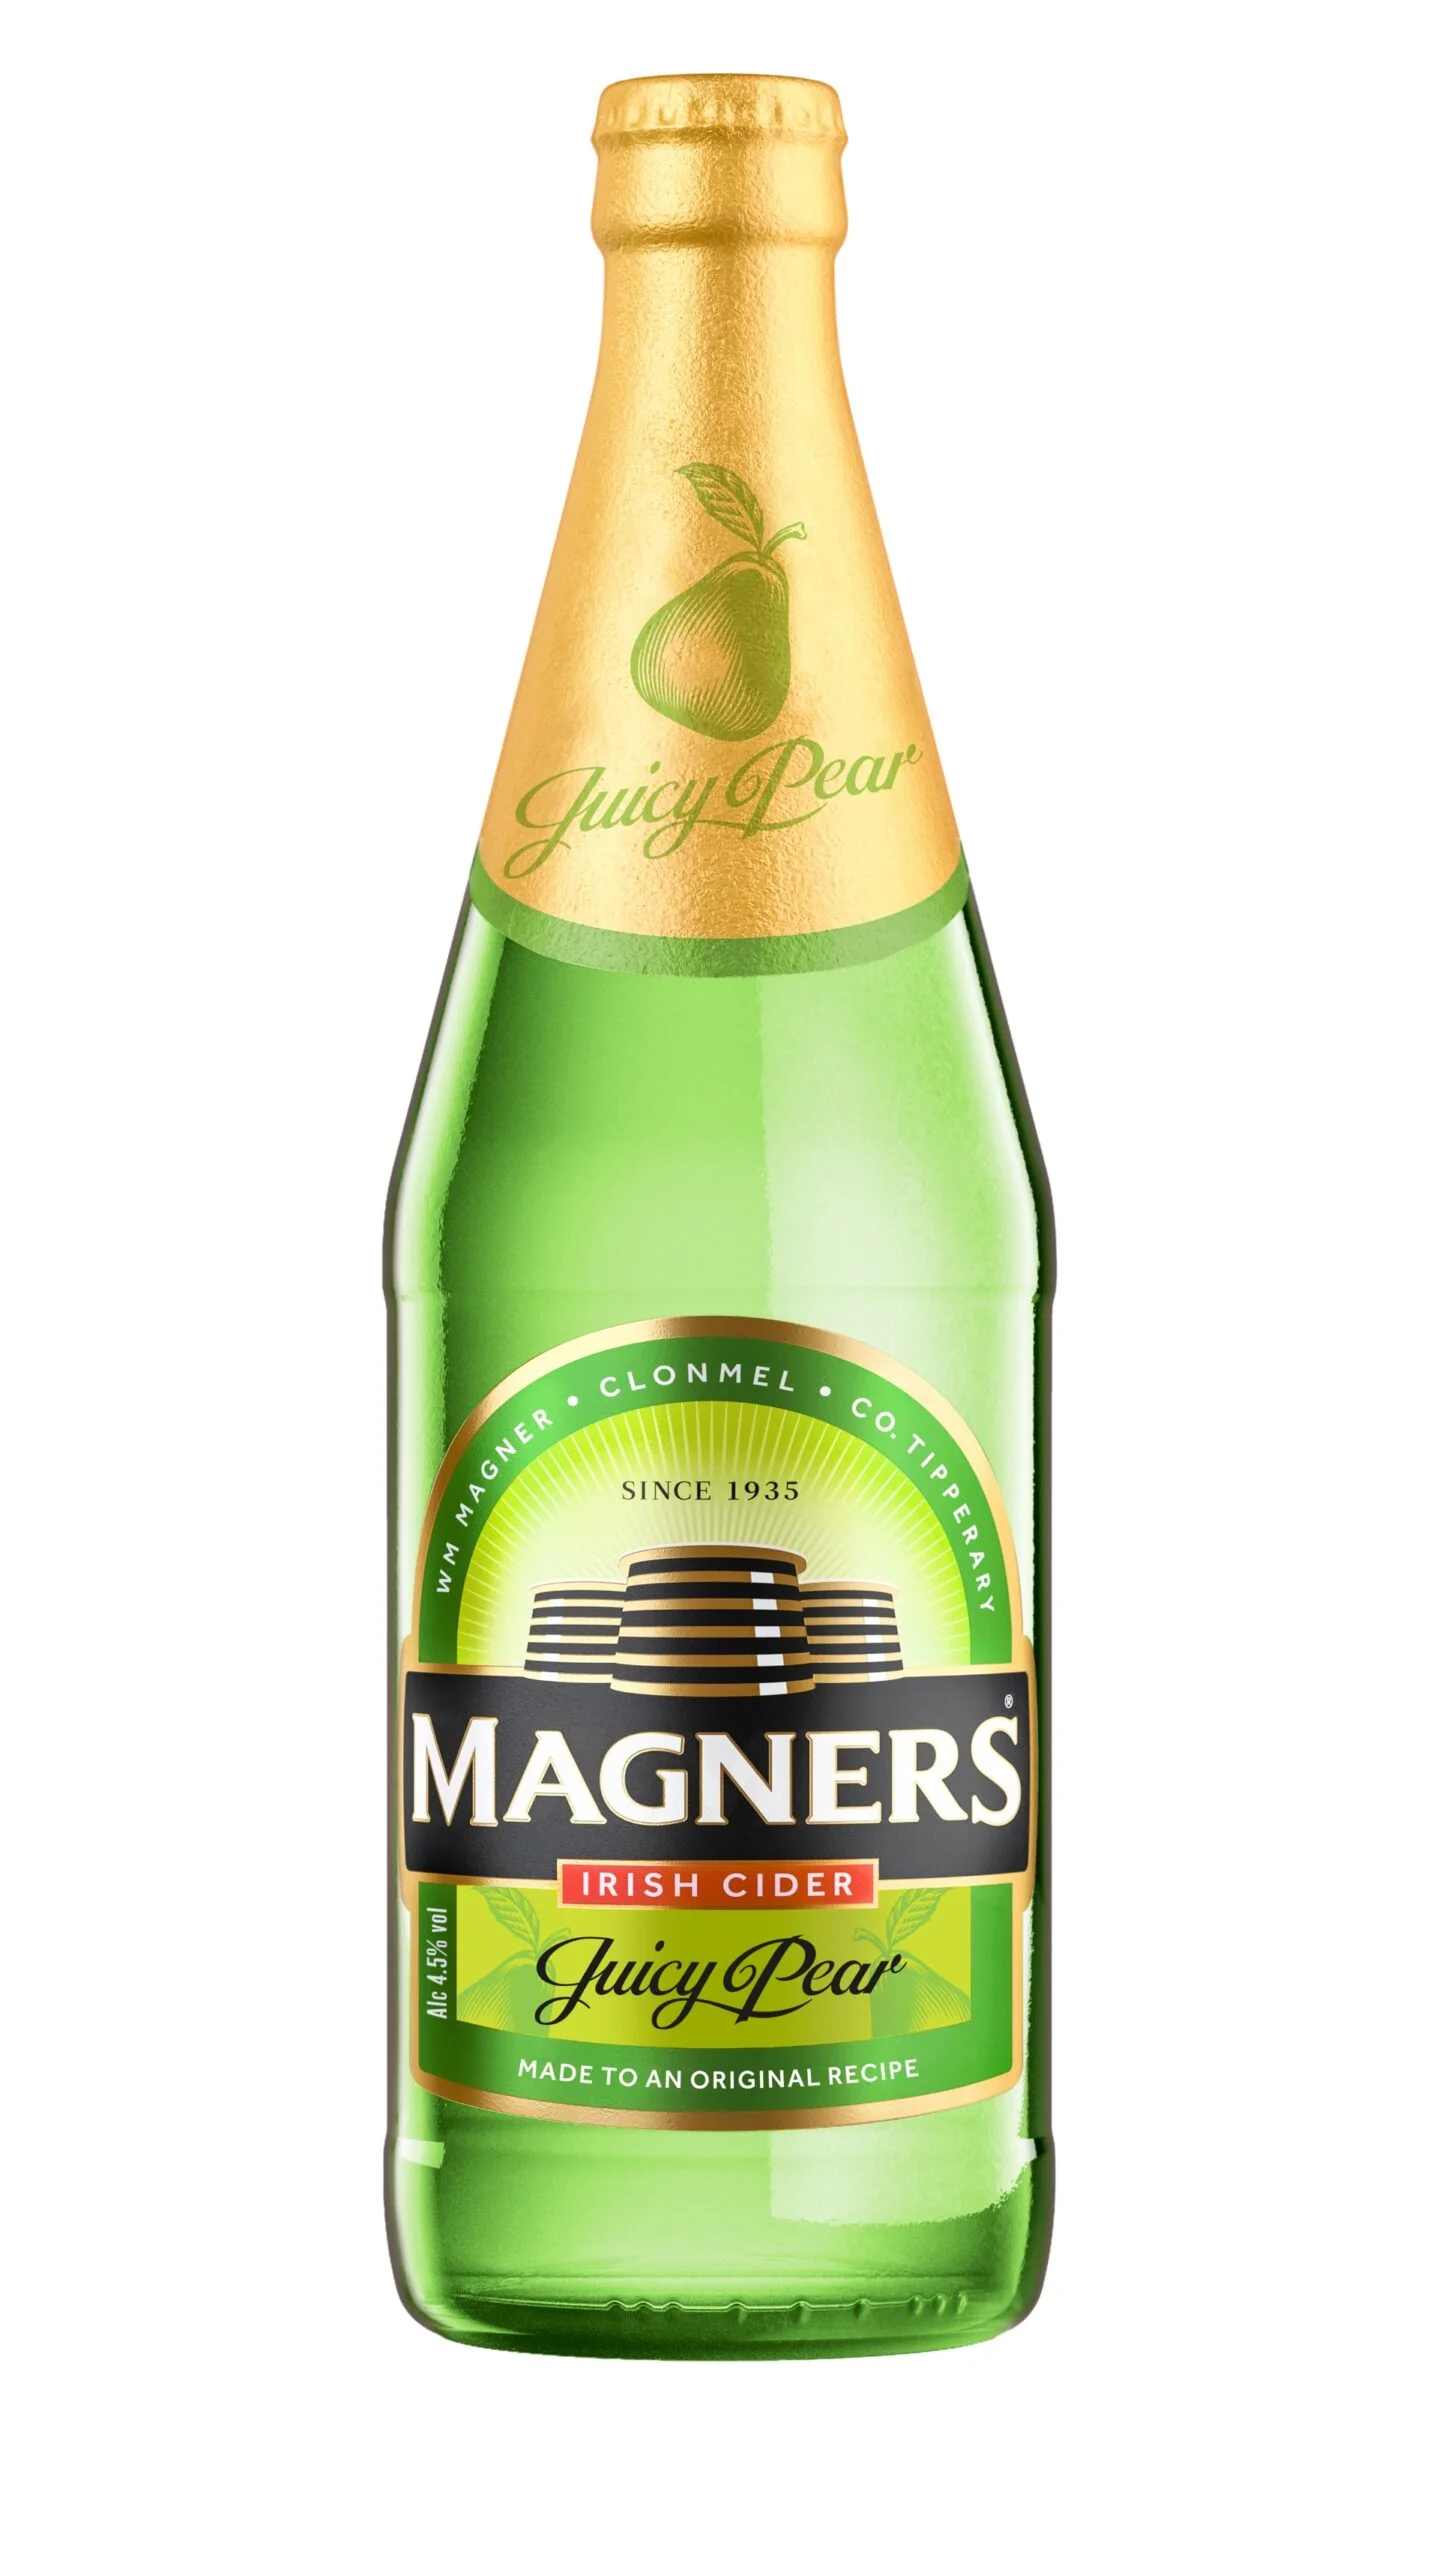 Magners Juicy Pear